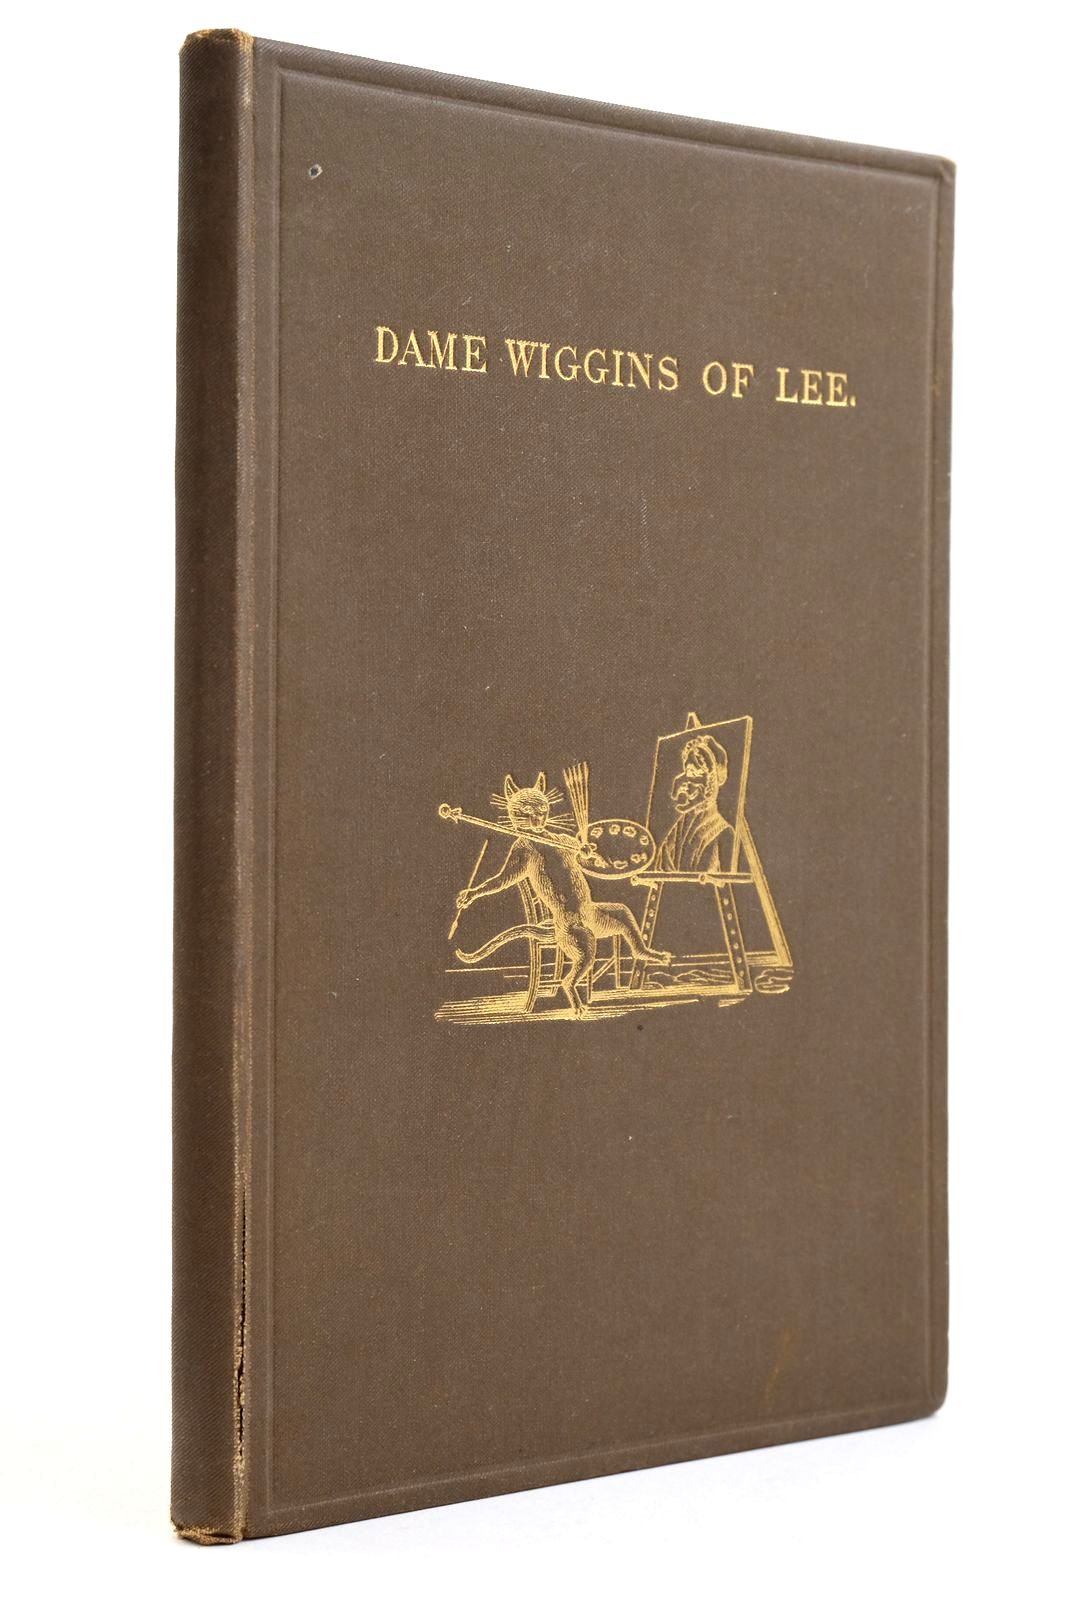 Photo of DAME WIGGINS OF LEE AND HER SEVEN WONDERFUL CATS written by Ruskin, John illustrated by Greenaway, Kate published by George Allen (STOCK CODE: 2133897)  for sale by Stella & Rose's Books